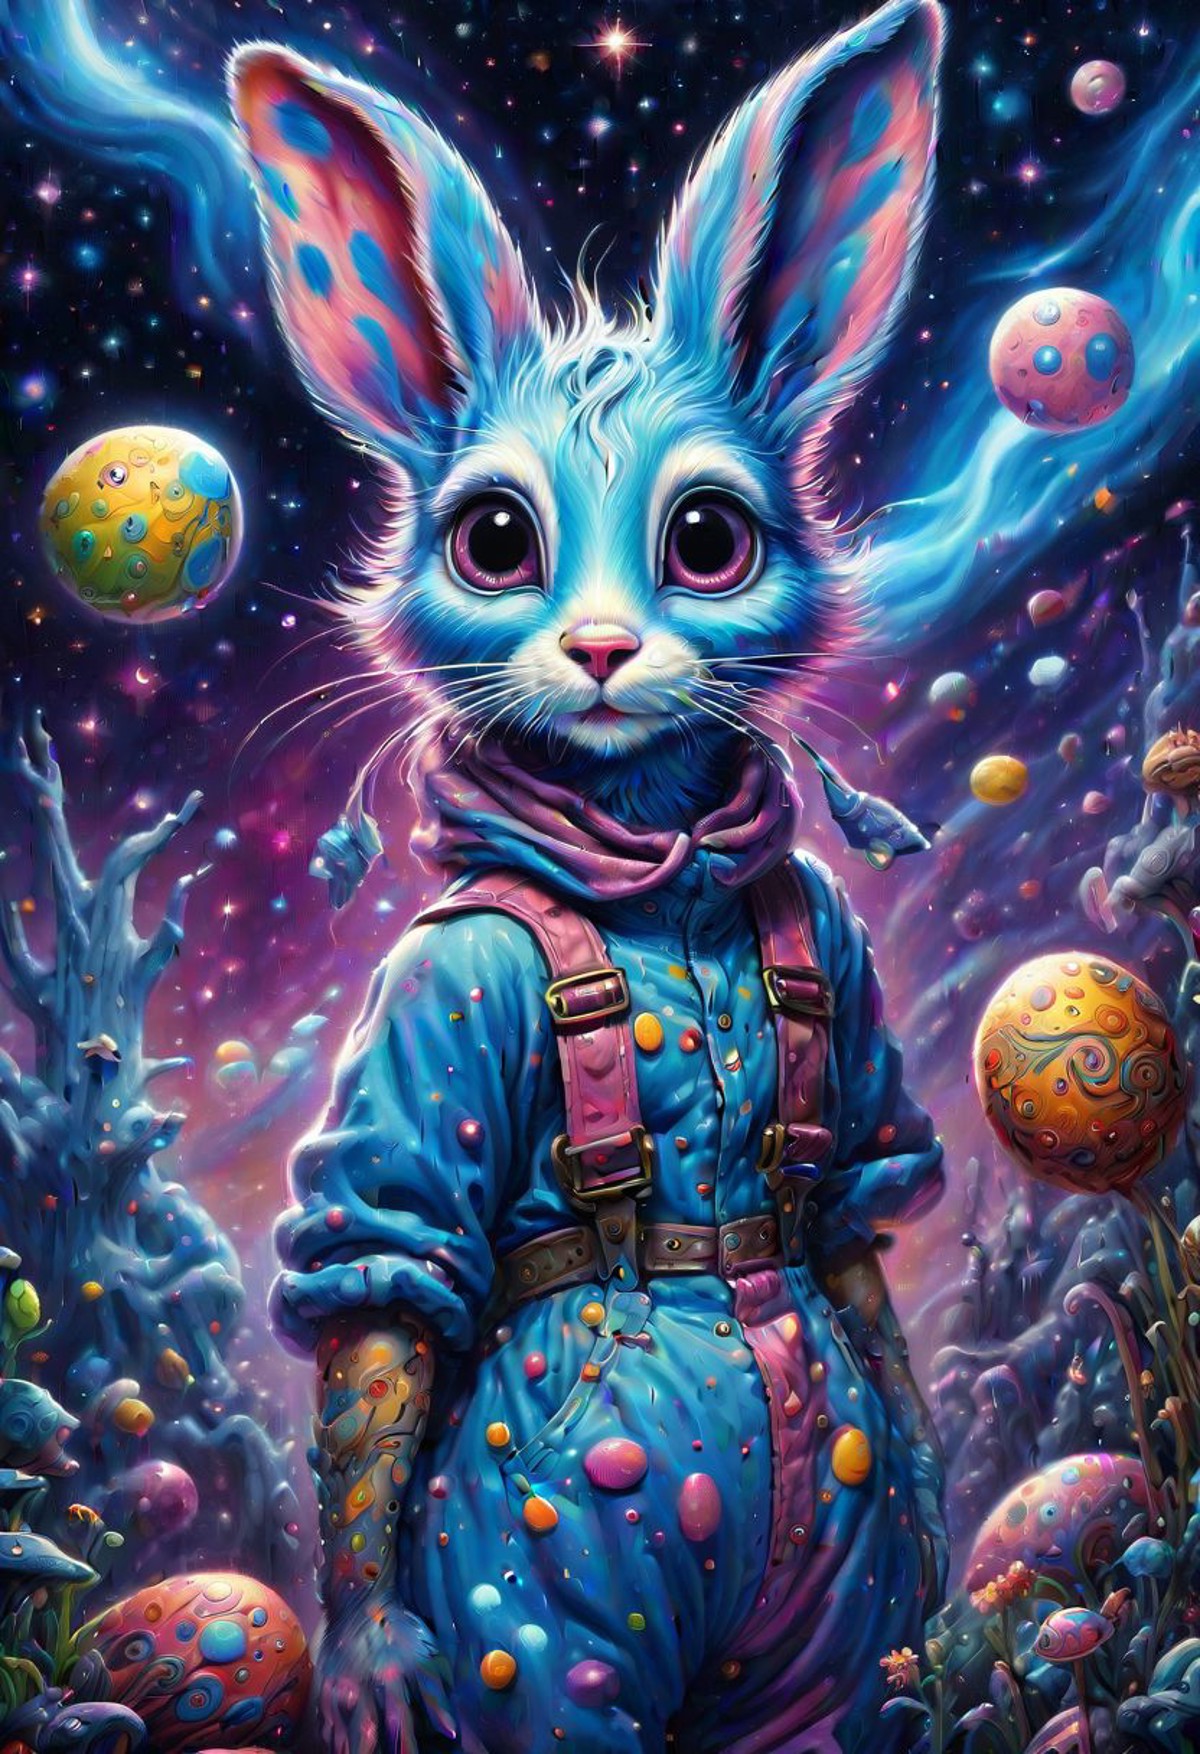 Dreamlike acrylic painting. The adorable humanoid Easter bunny, dressed in overalls with suspenders, all covered with pain...